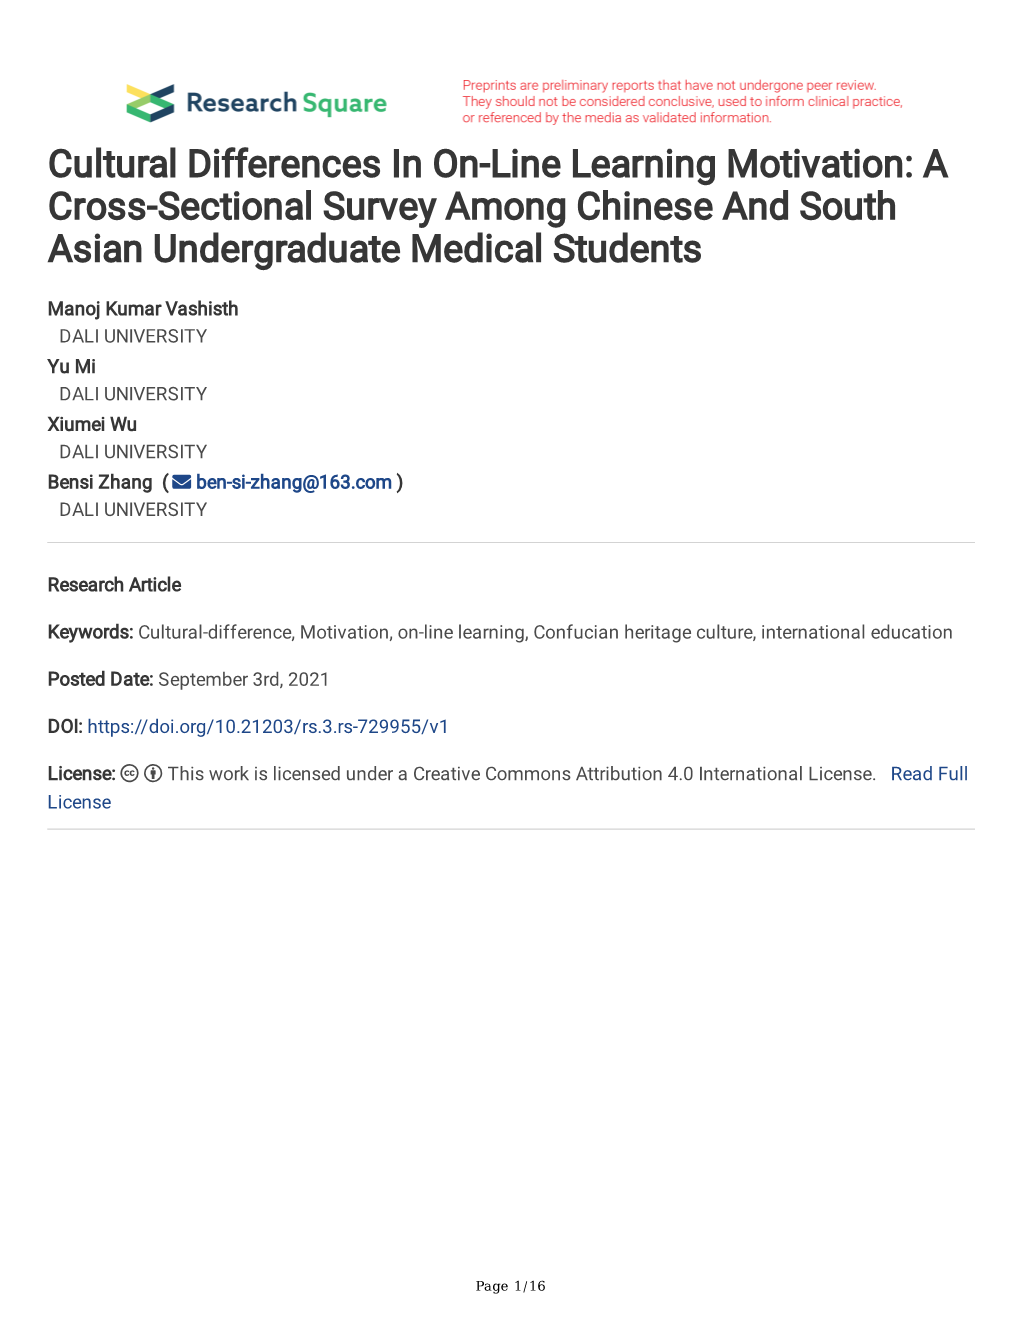 Cultural Differences in On-Line Learning Motivation: a Cross-Sectional Survey Among Chinese and South Asian Undergraduate Medical Students